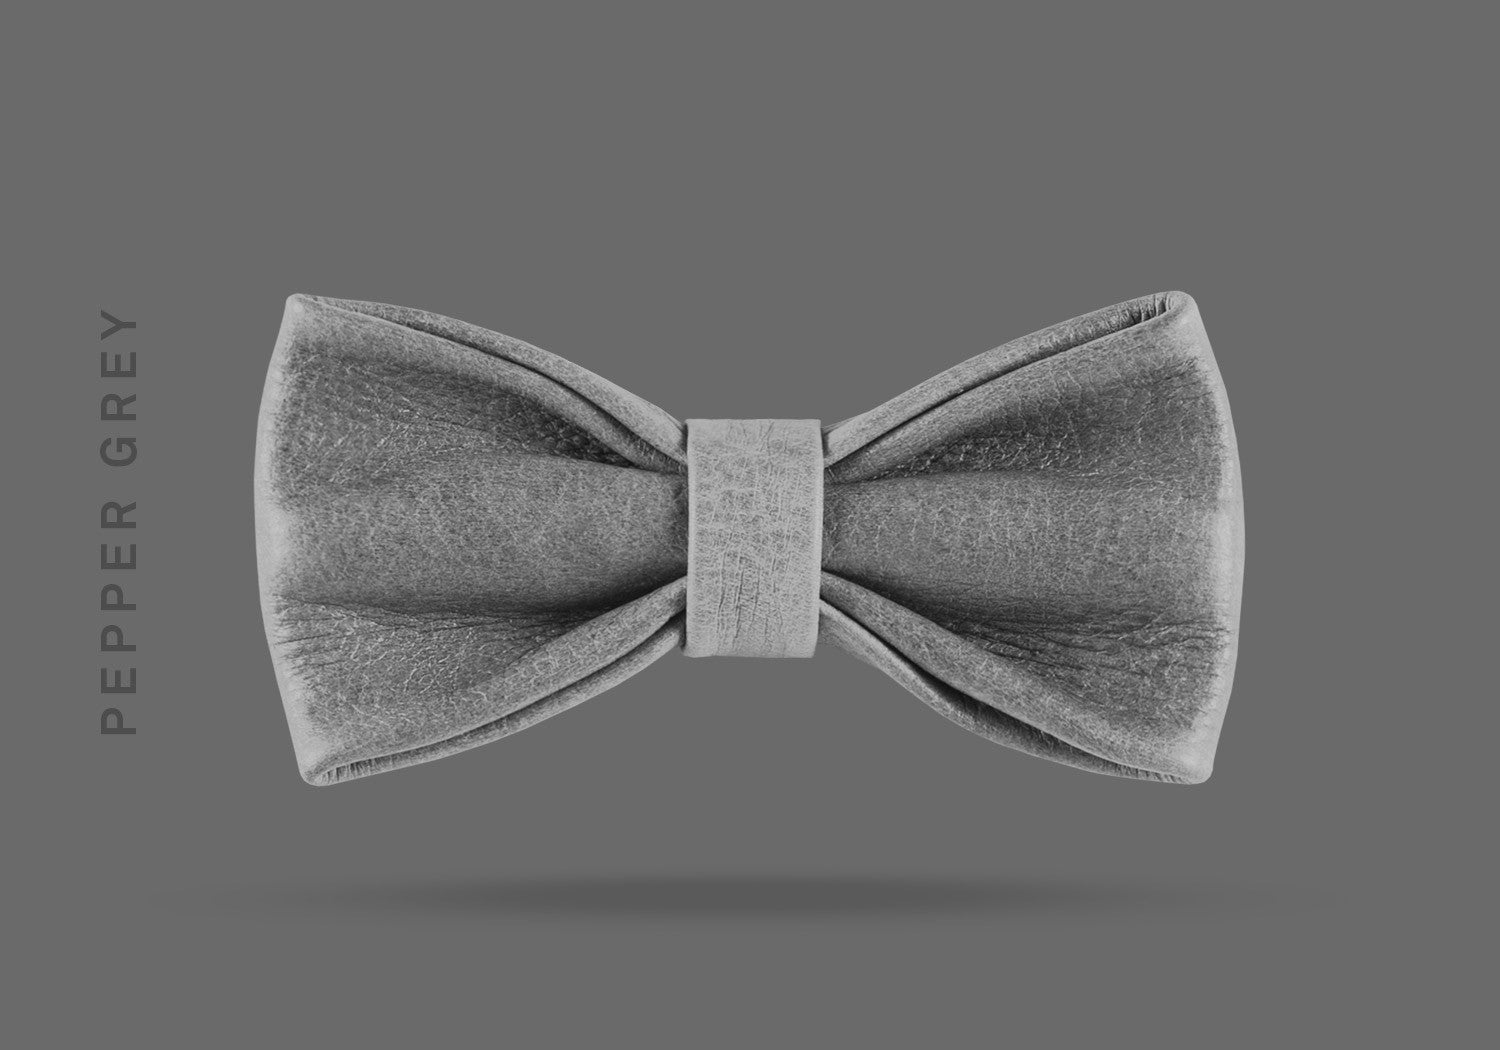 This pepper grey WEEF handmade leather bow is a great present or gift idea for dapper and stylish gentlemen for fathers day, valentines day or Christmas.